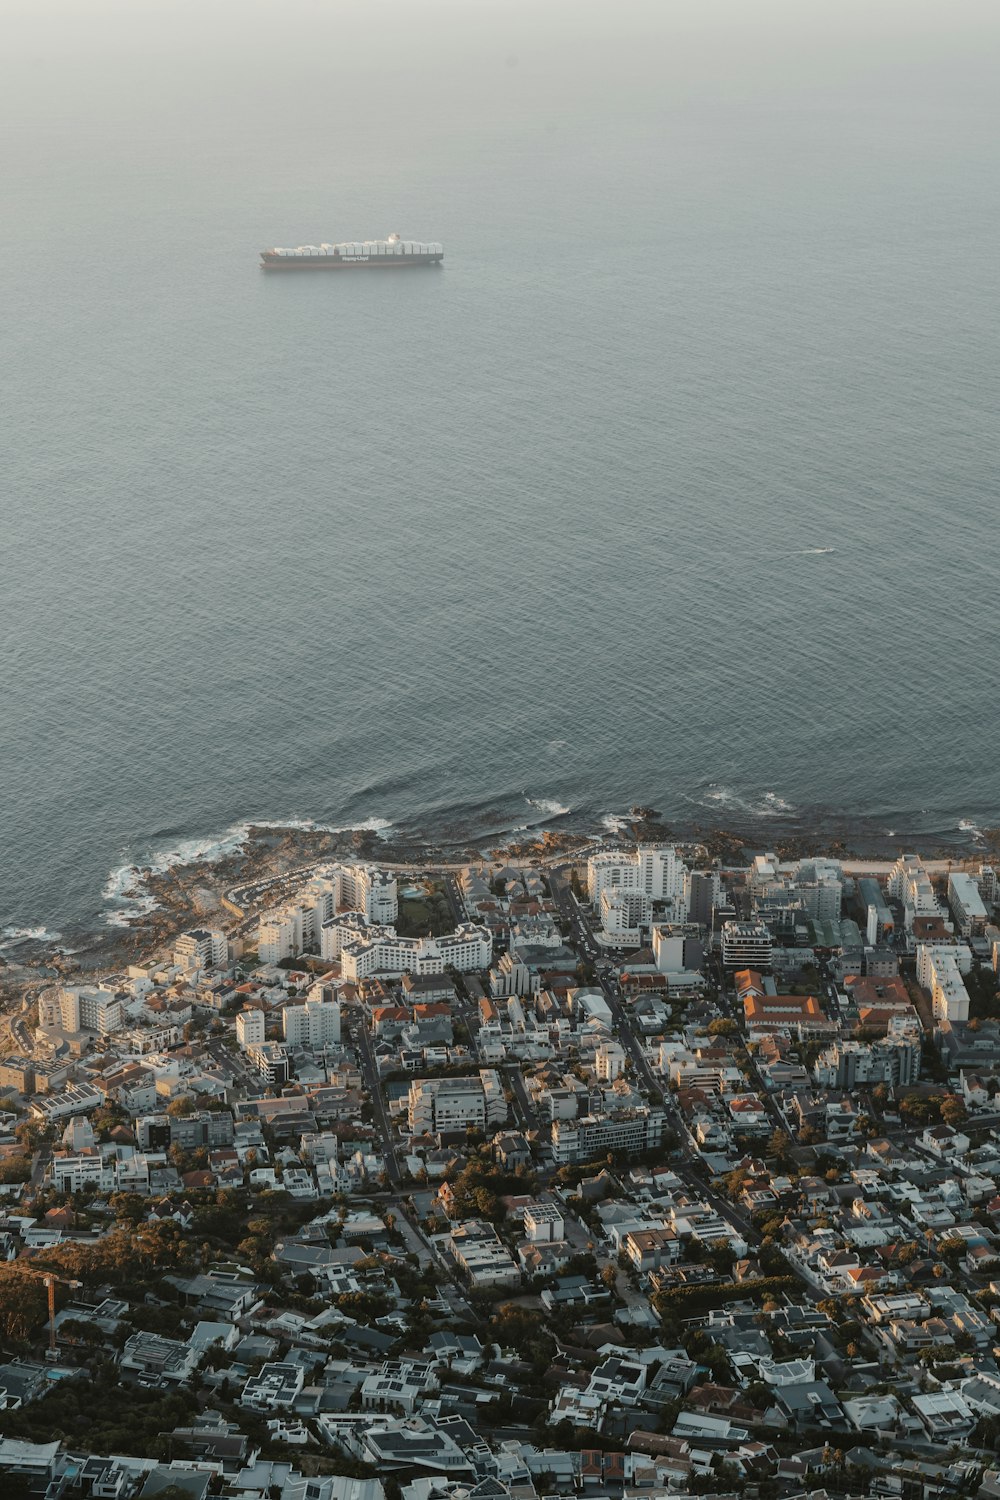 an aerial view of a city by the ocean